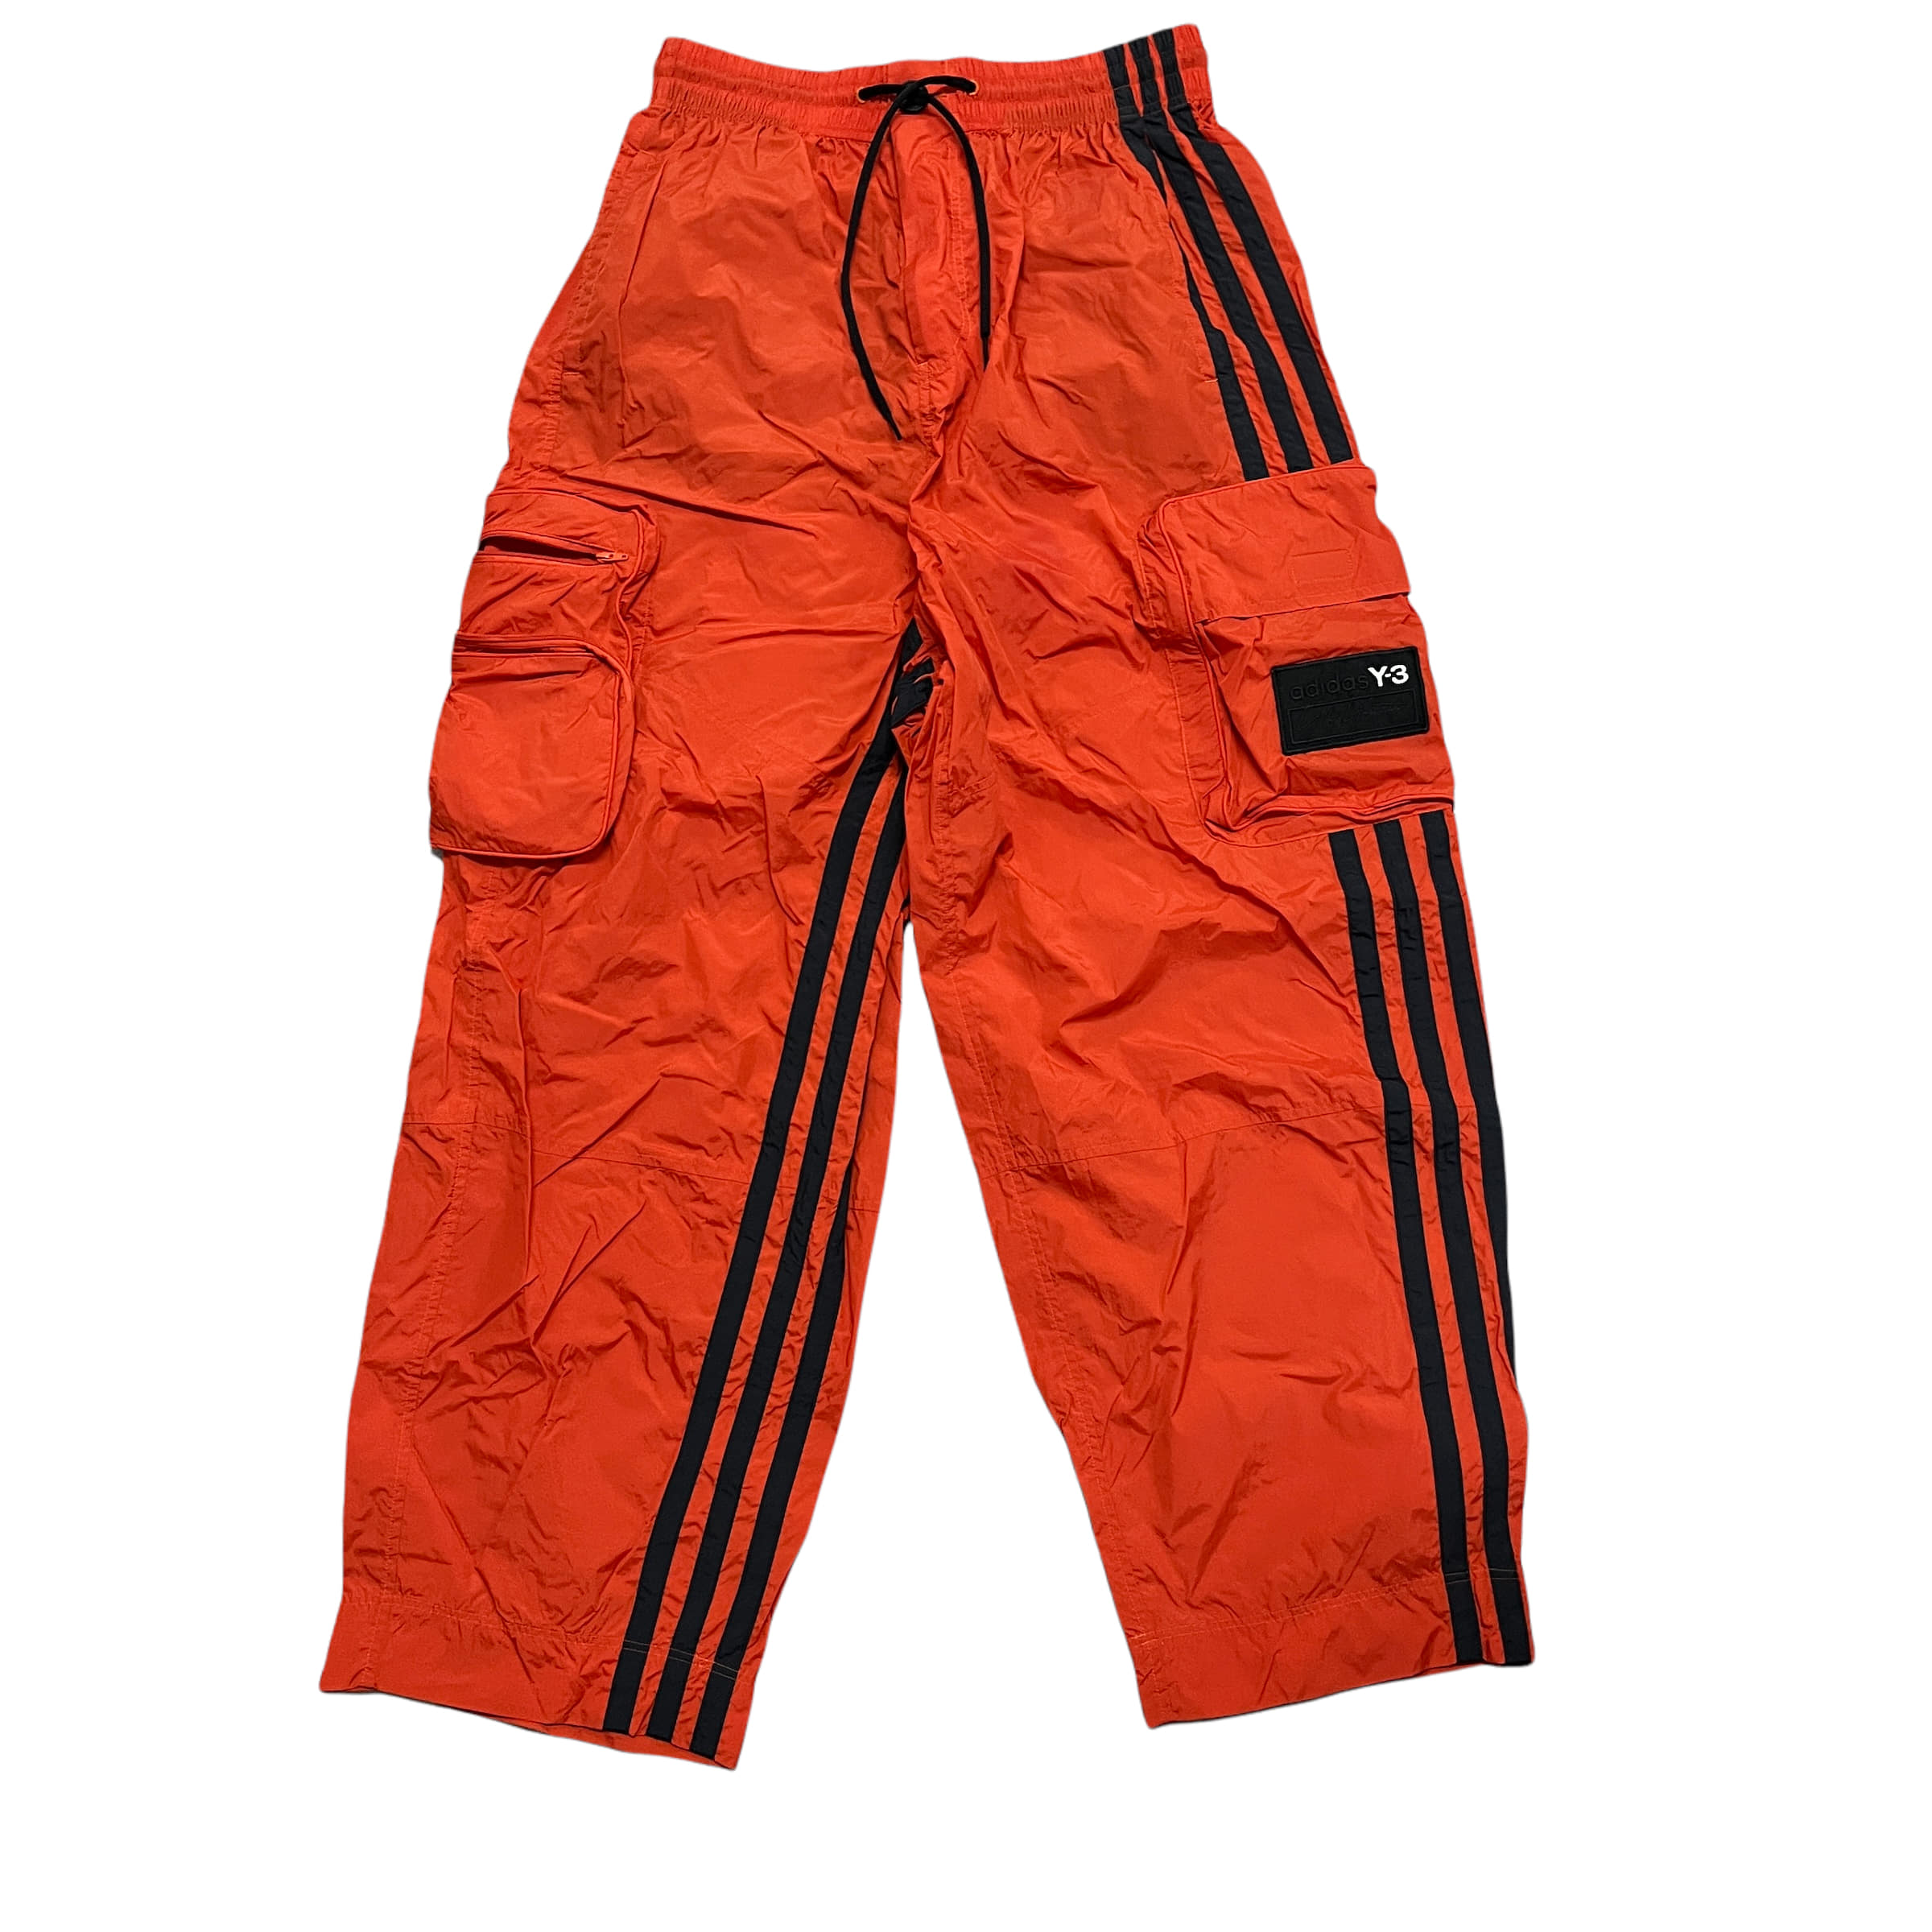 [Y3] Shell Track Pants OR-Size S